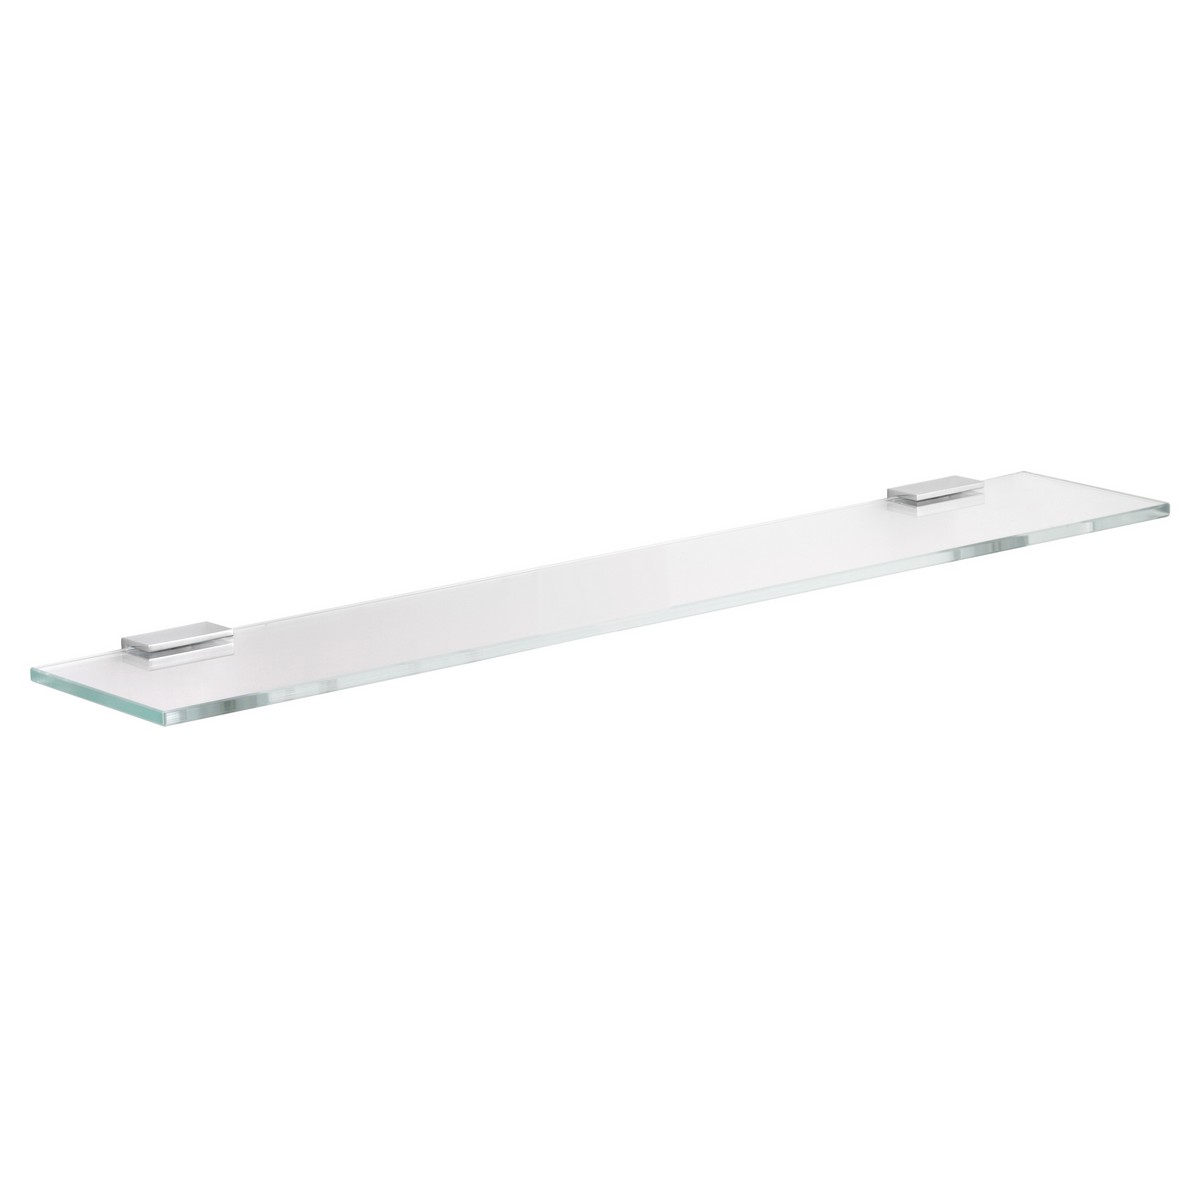 KEUCO 12710015500 MOLL 19 3/4 INCH WALL MOUNTED GLASS SHELF WITH BRACKETS IN POLISHED CHROME